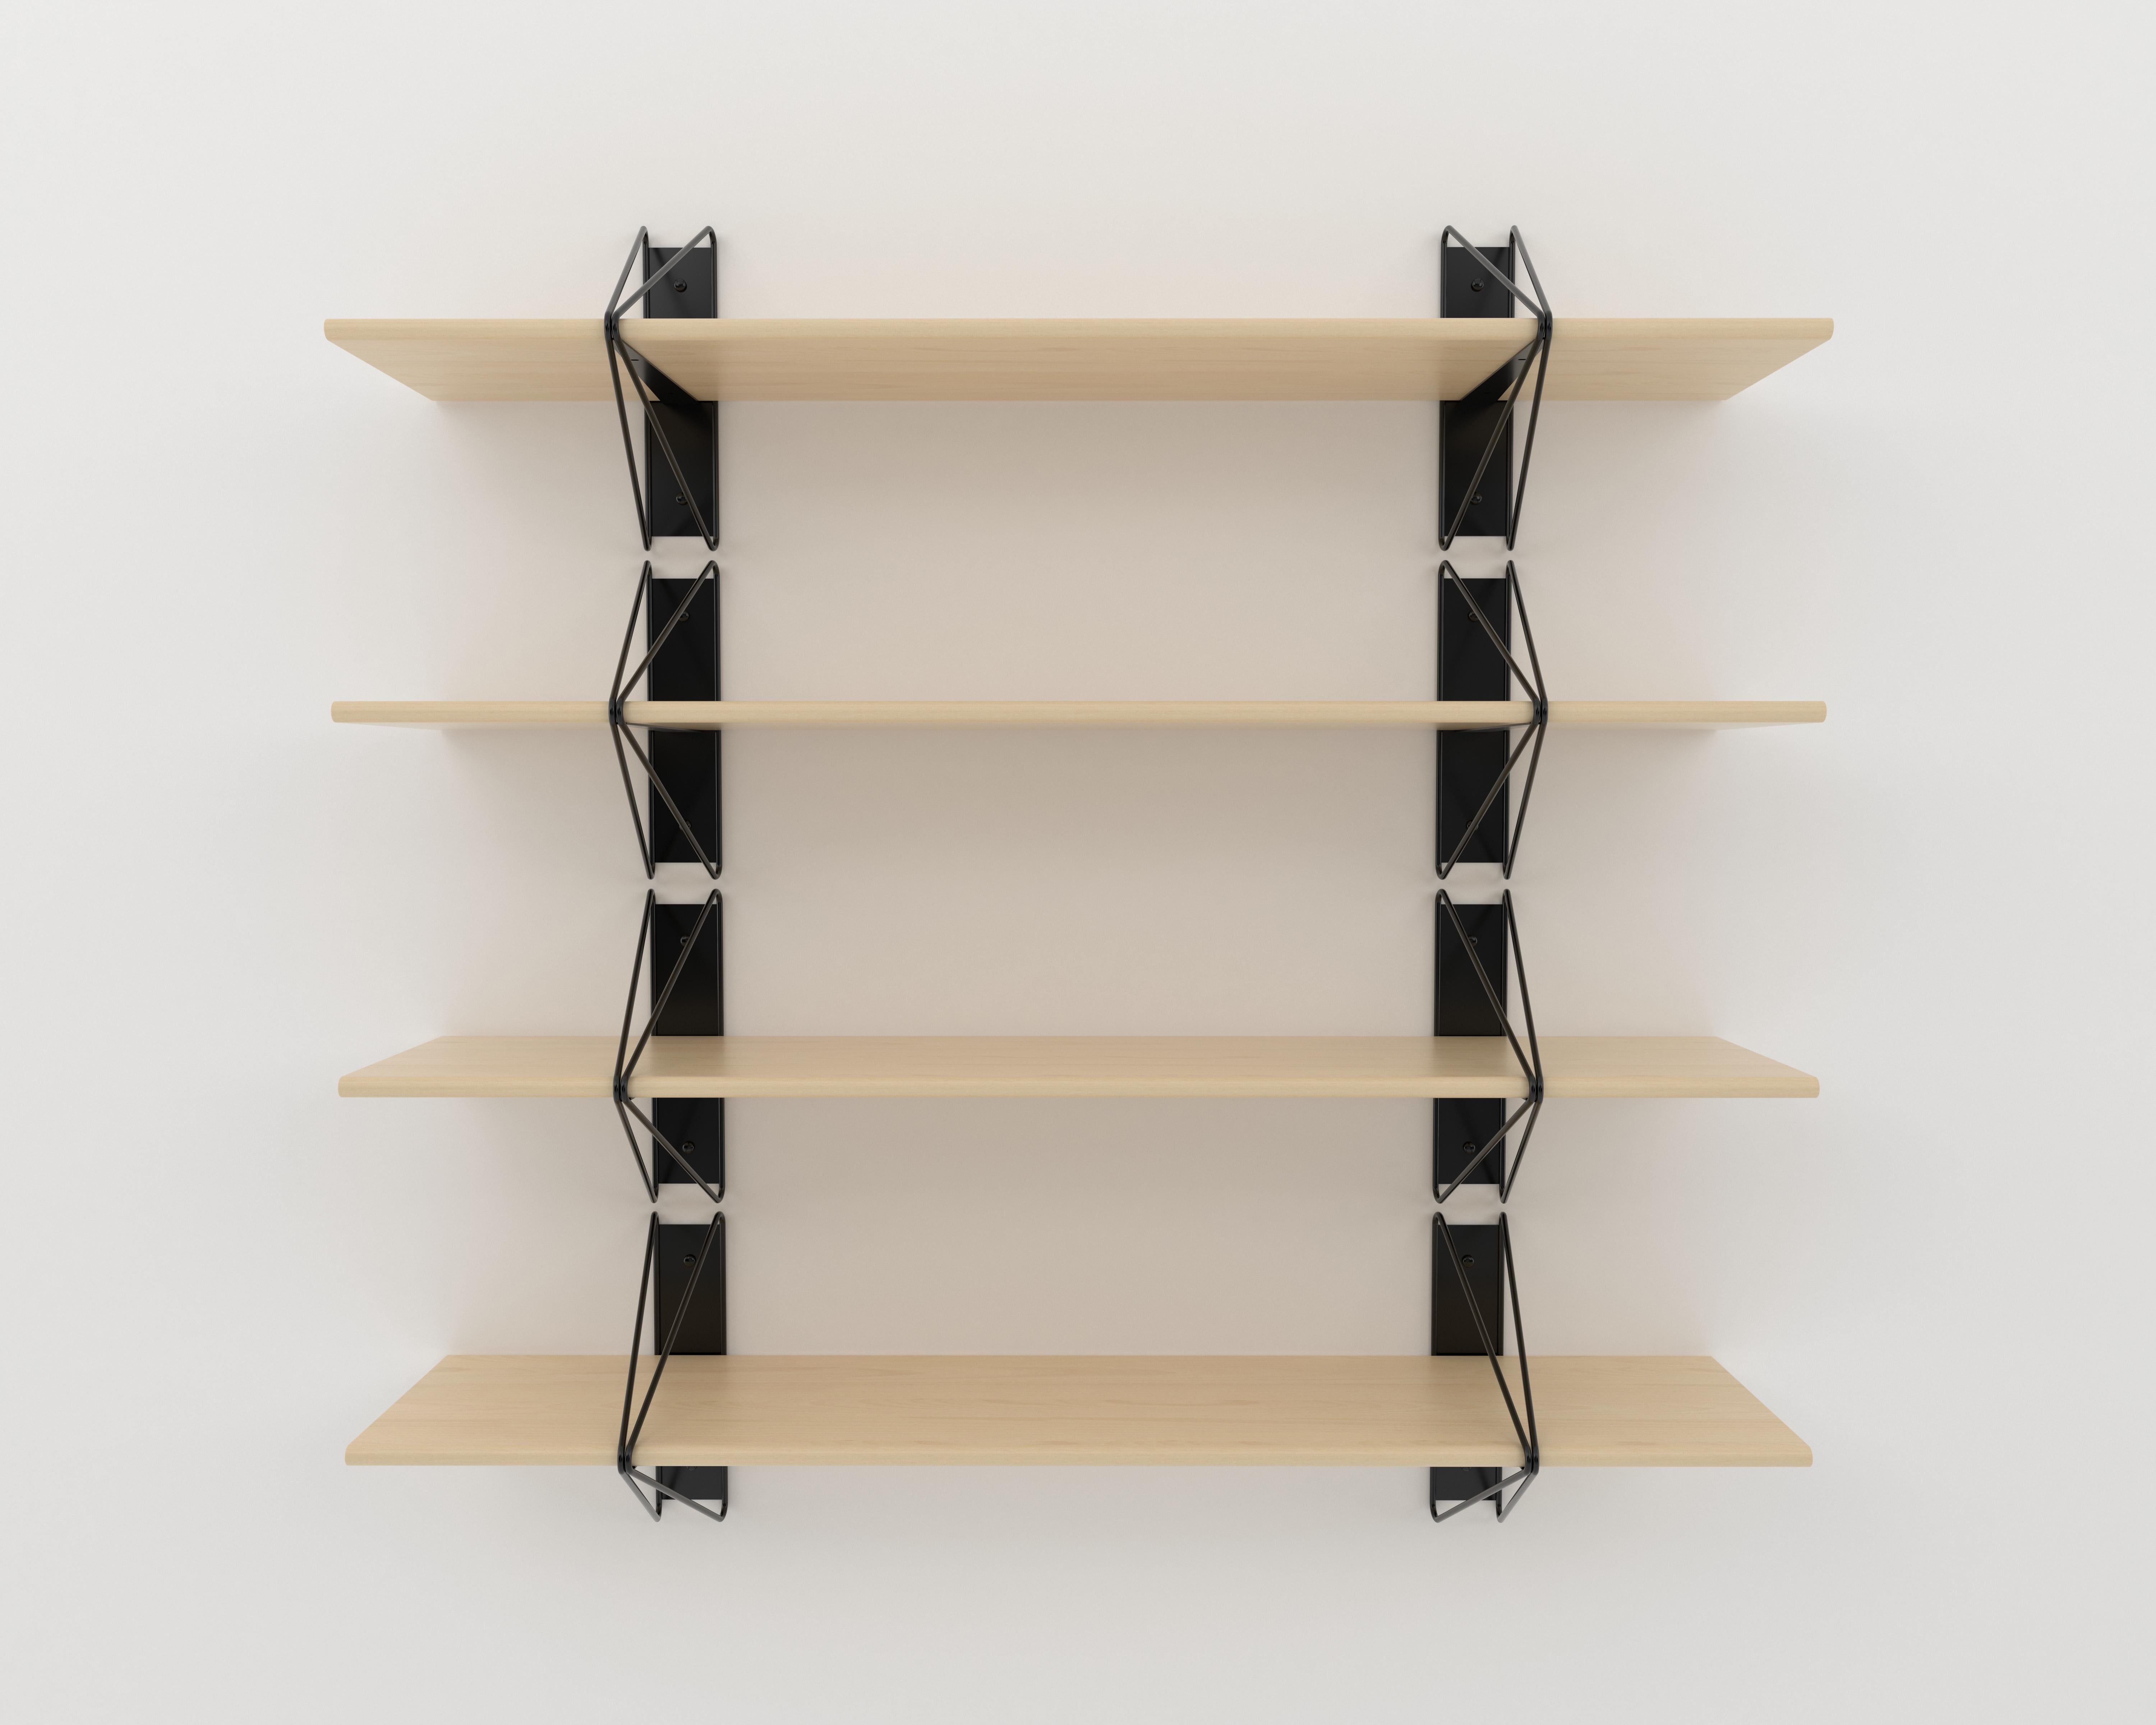 Oiled Set of 4 Strut Shelves from Souda, White and Maple, Made to Order For Sale